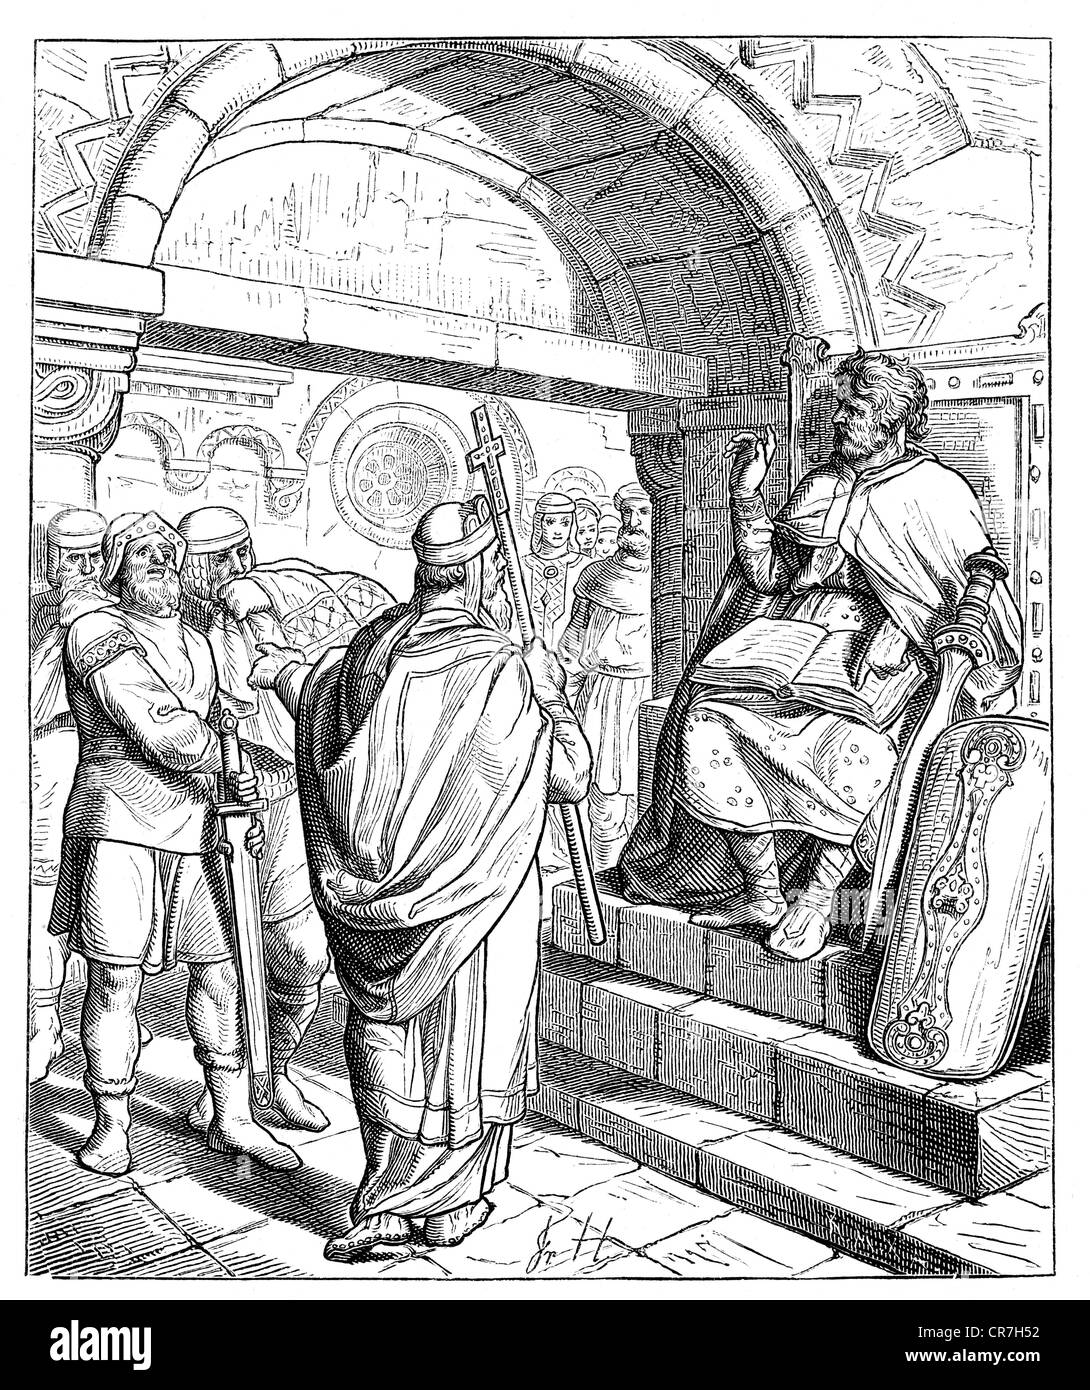 Charlemagne, 2.4.742 - 28.1.814, King of the Franks 768 - 814, Roman Emperor 800 - 814, scene,  Charlemagne holding the assizes, wood engraving, after drawing by Friedrich Hottenroth, 19th century, Stock Photo